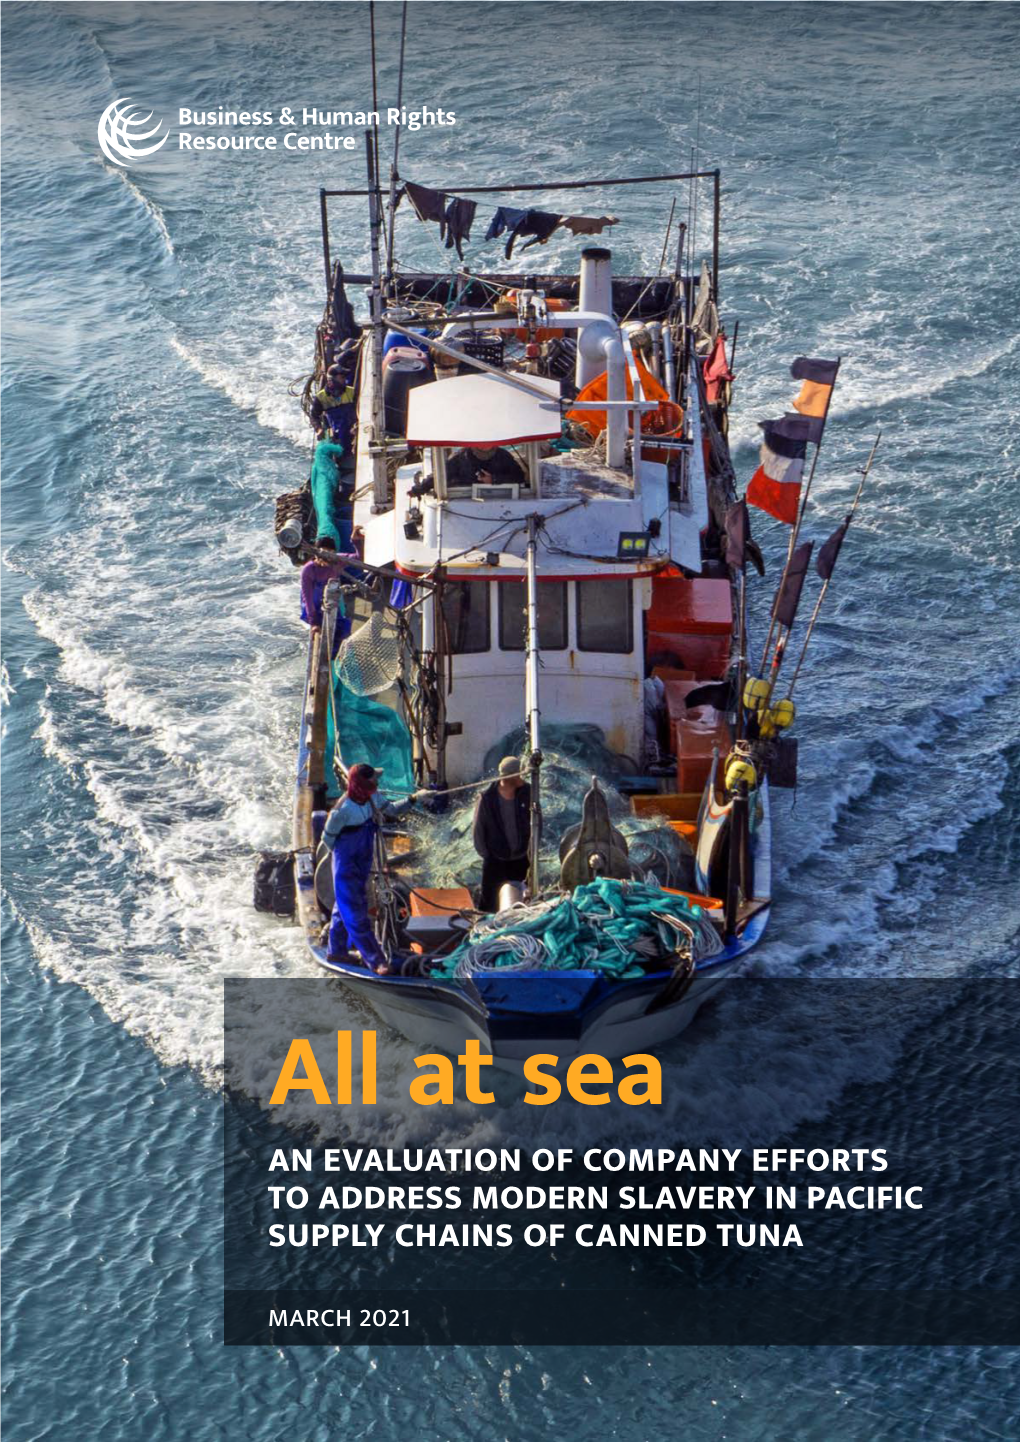 All at Sea an EVALUATION of COMPANY EFFORTS to ADDRESS MODERN SLAVERY in PACIFIC SUPPLY CHAINS of CANNED TUNA